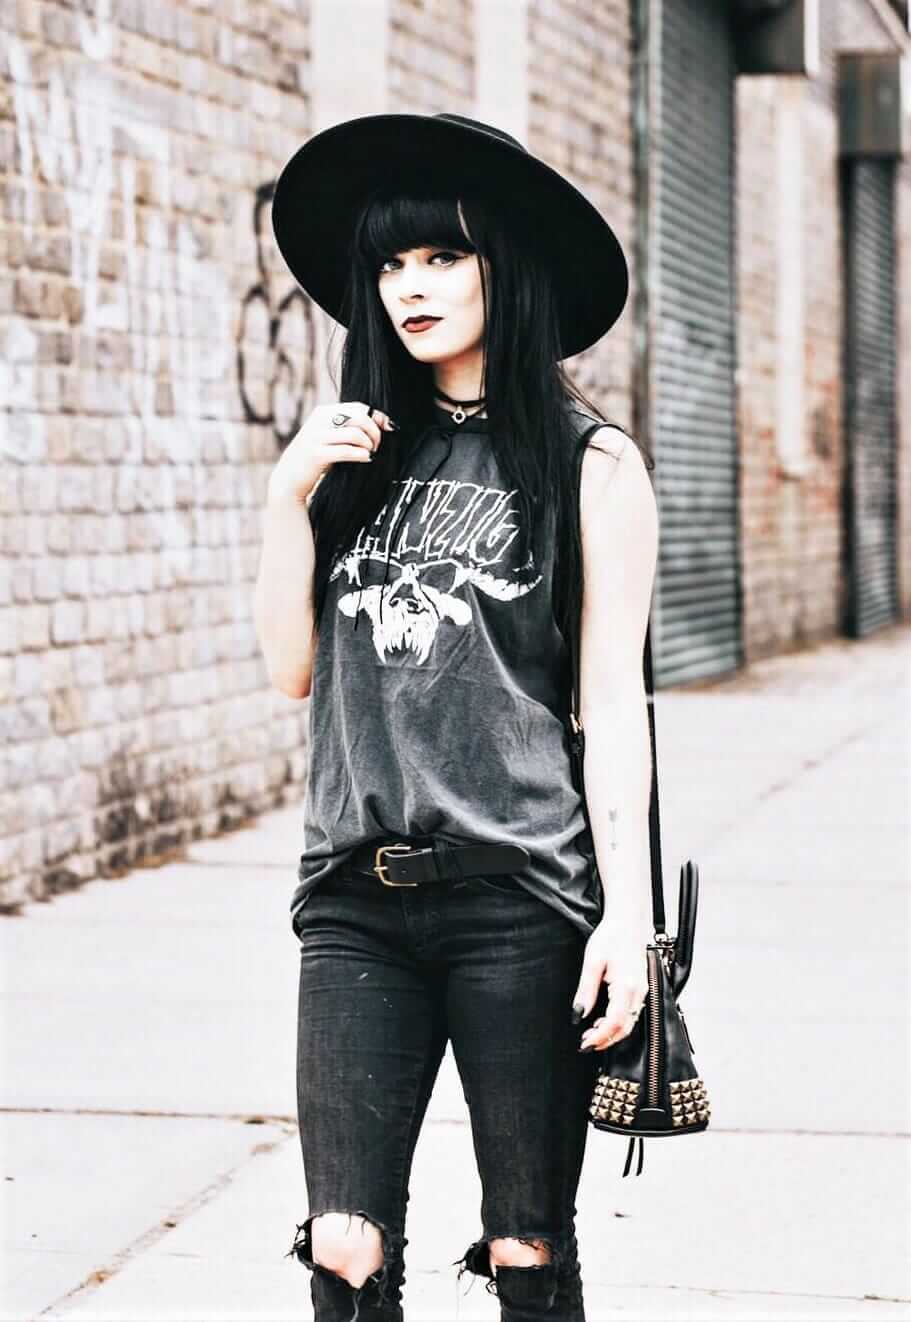 Black round hat, necklace, danzig shirt, ripped jeans & coach bag by jaglever